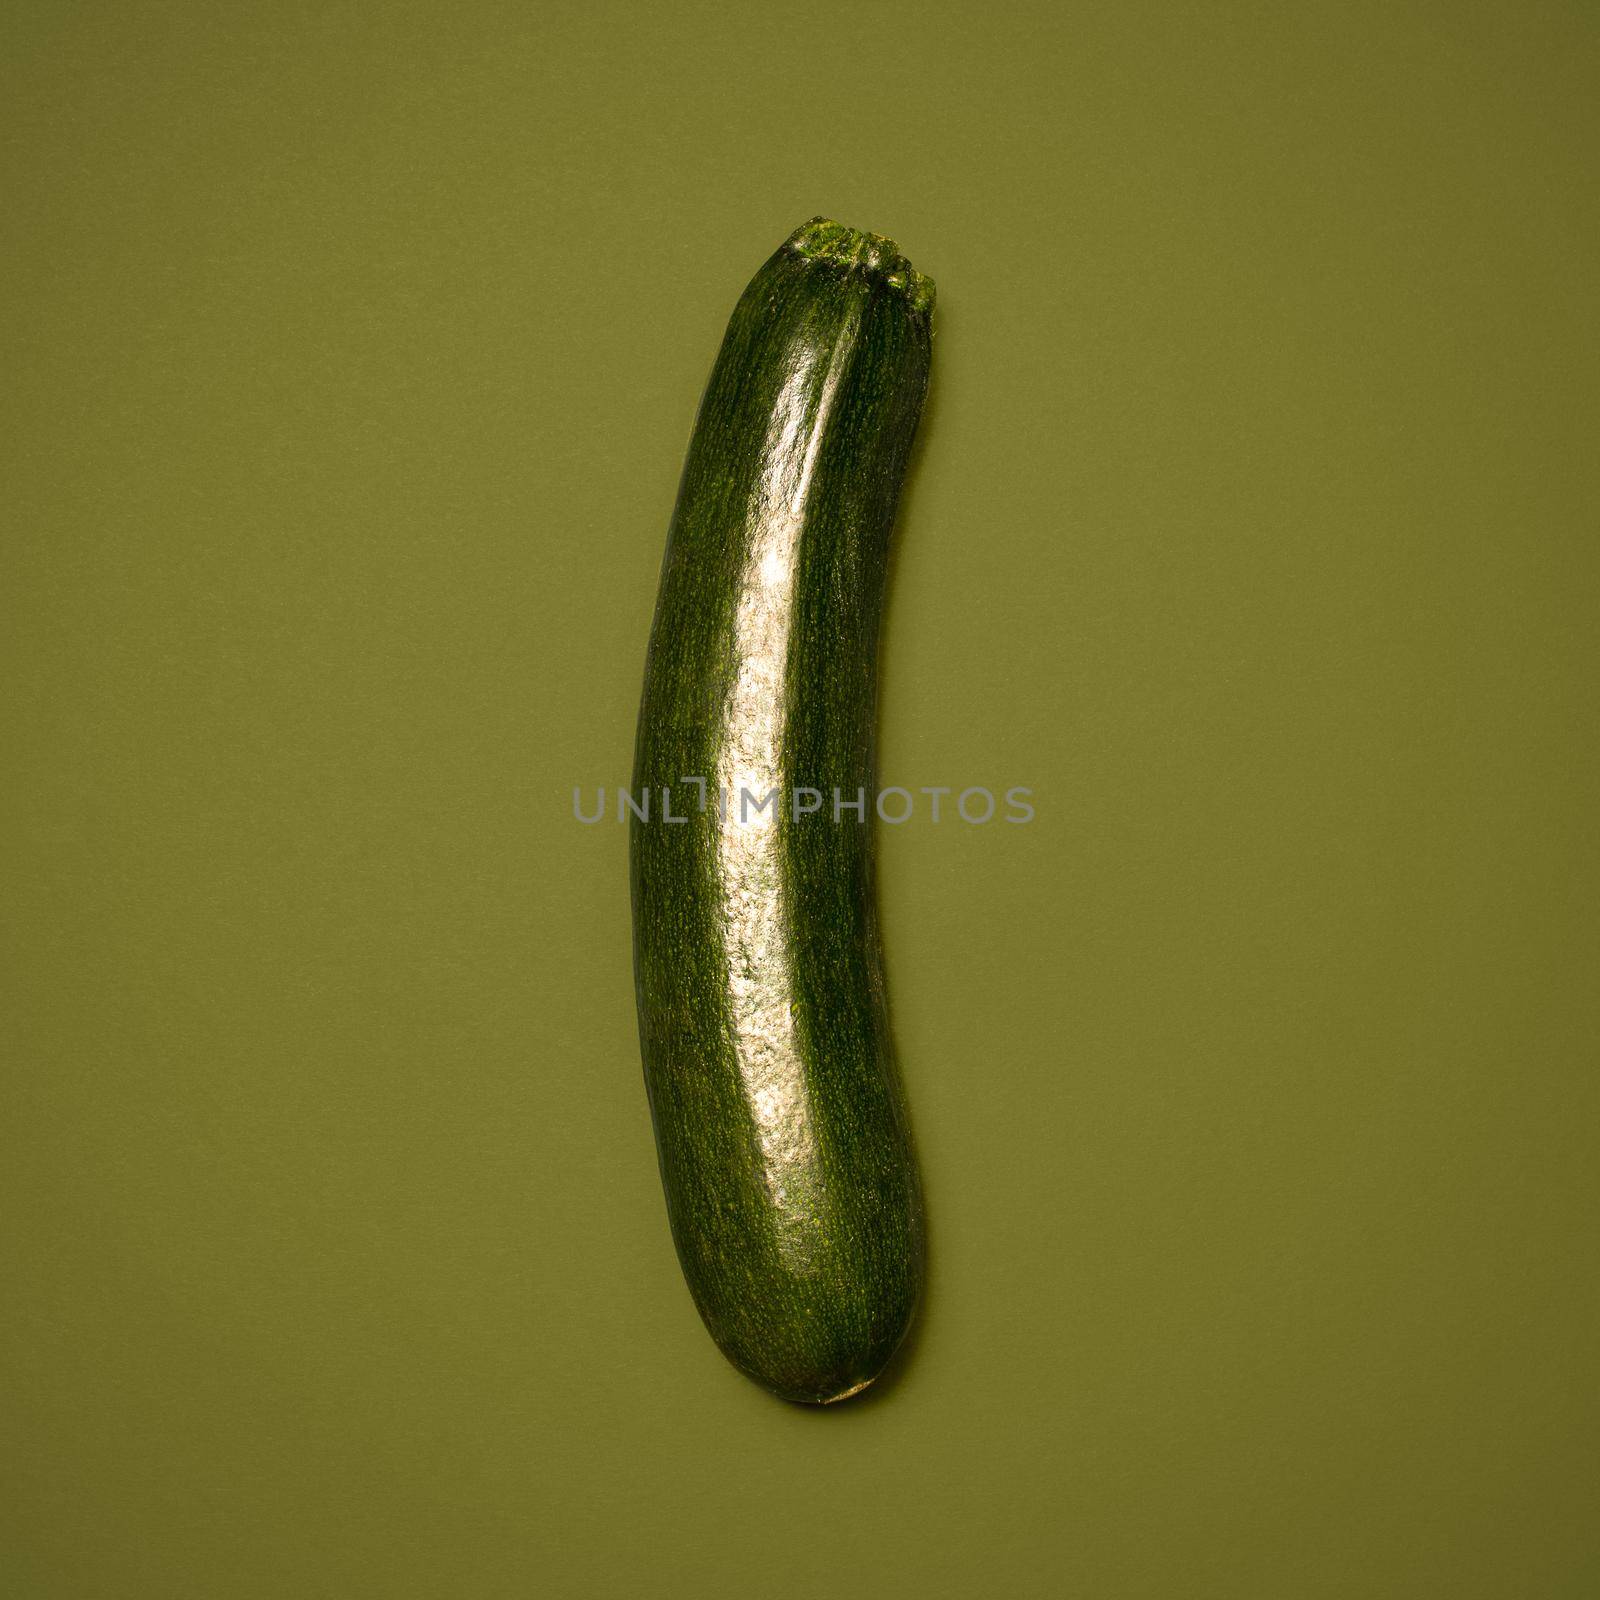 Shot of a green marrow against a studio background.